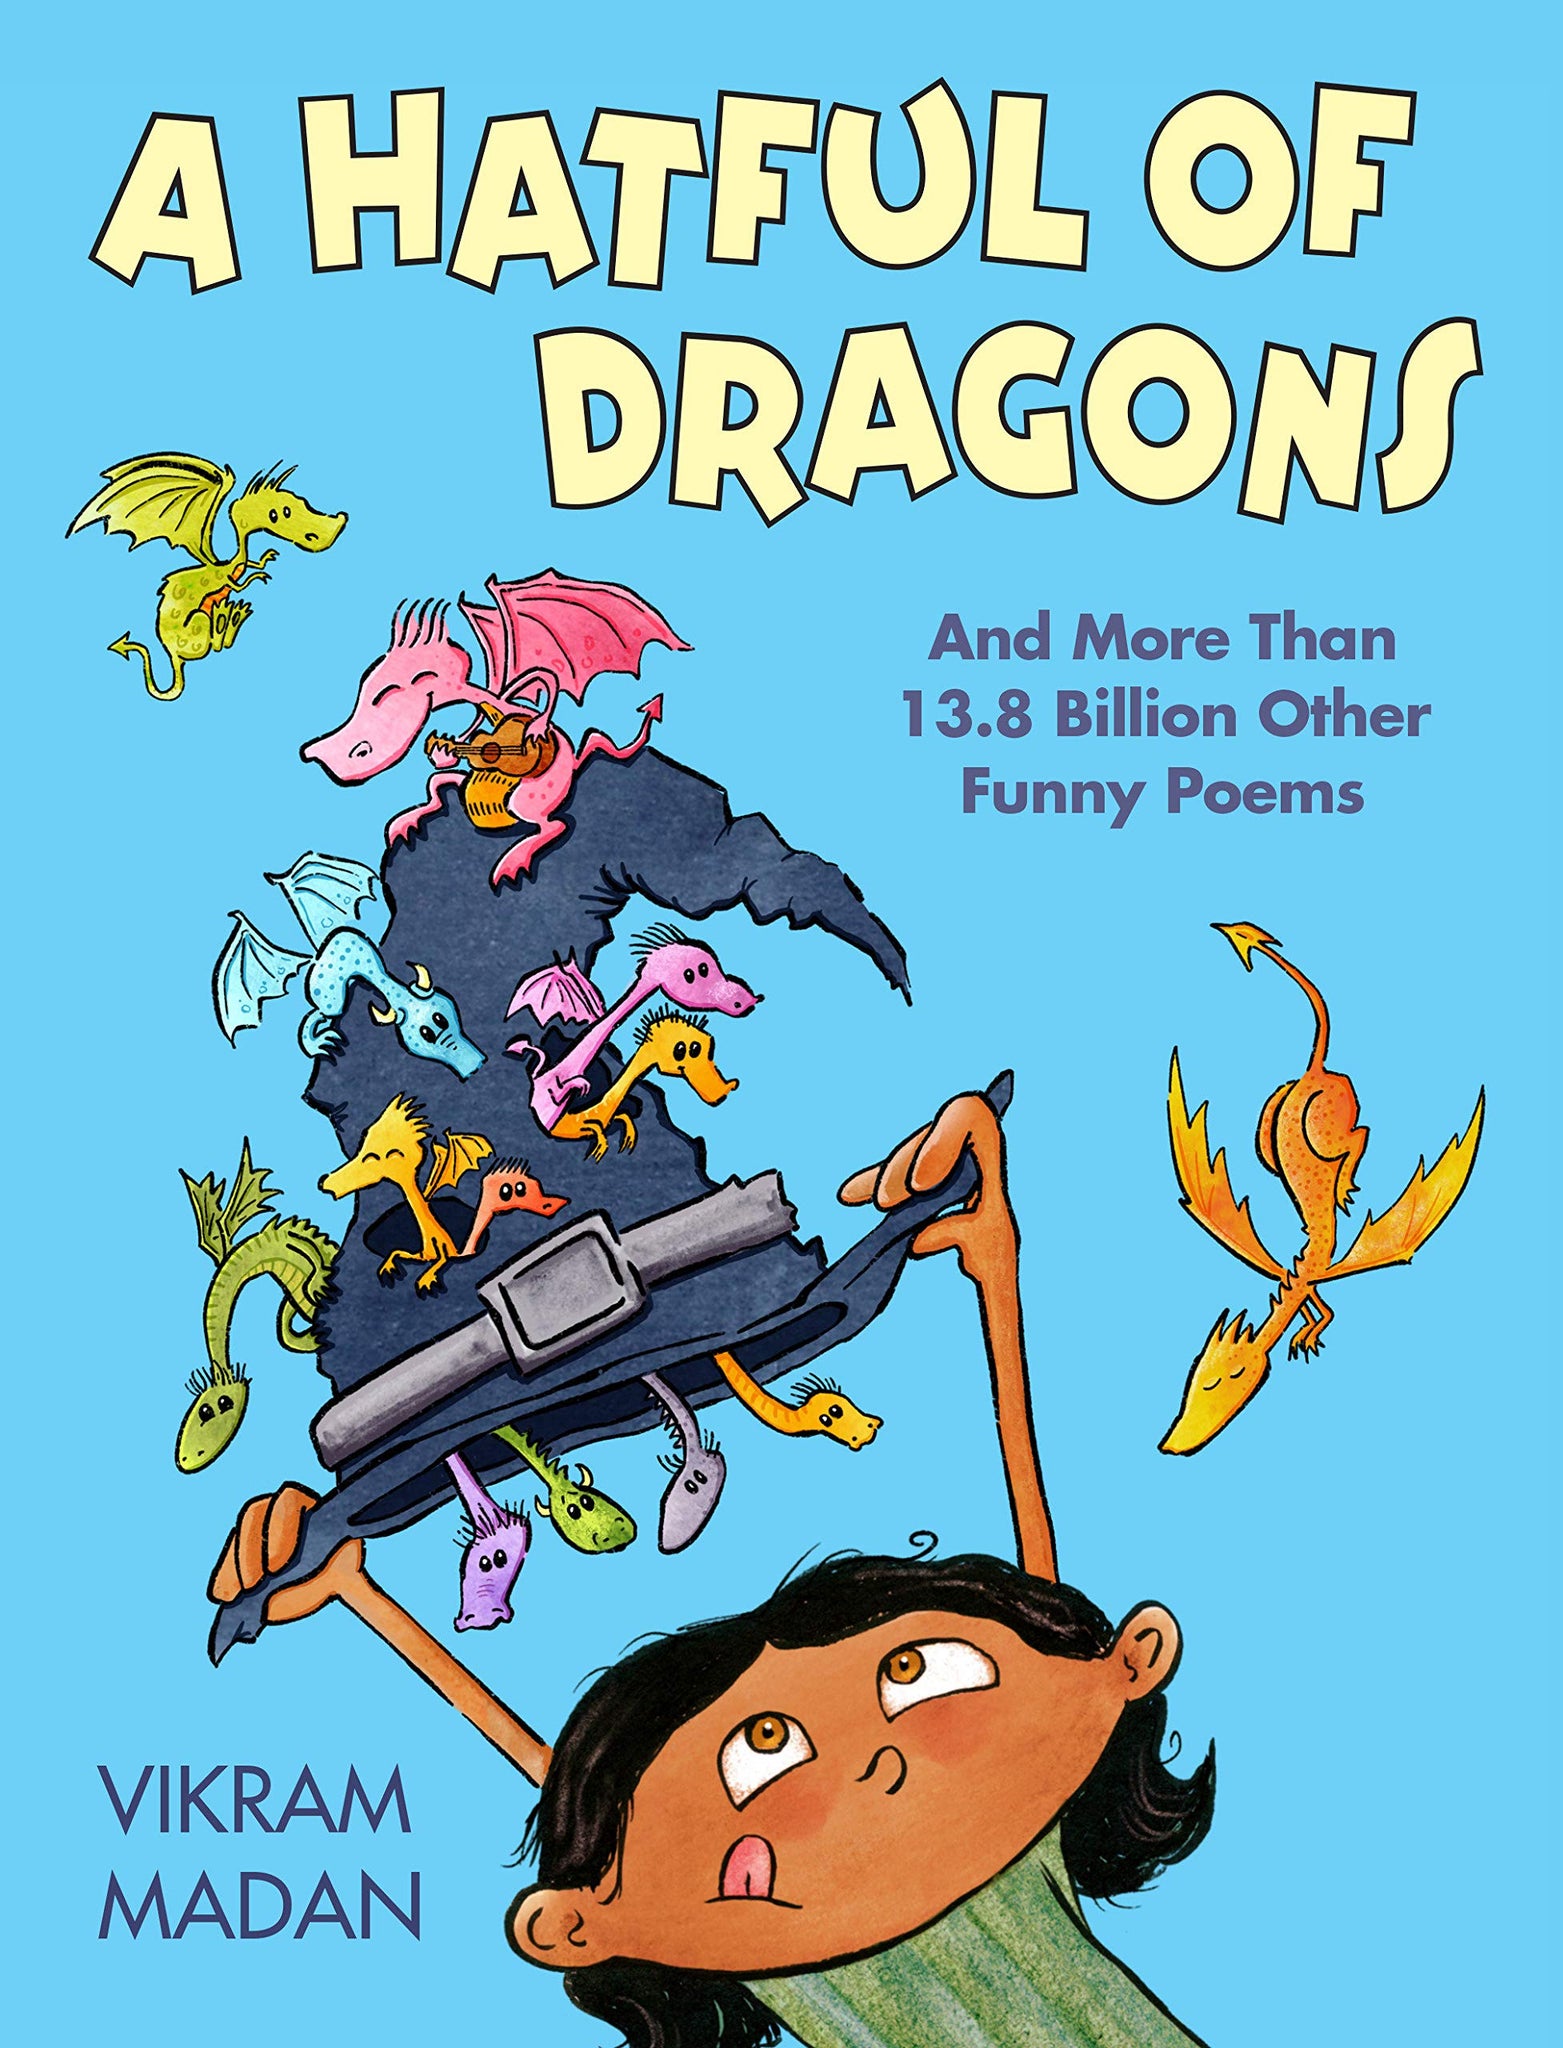 A Hatful of Dragons: And More Than 13.8 Billion other Funny Poems (Hardcover)